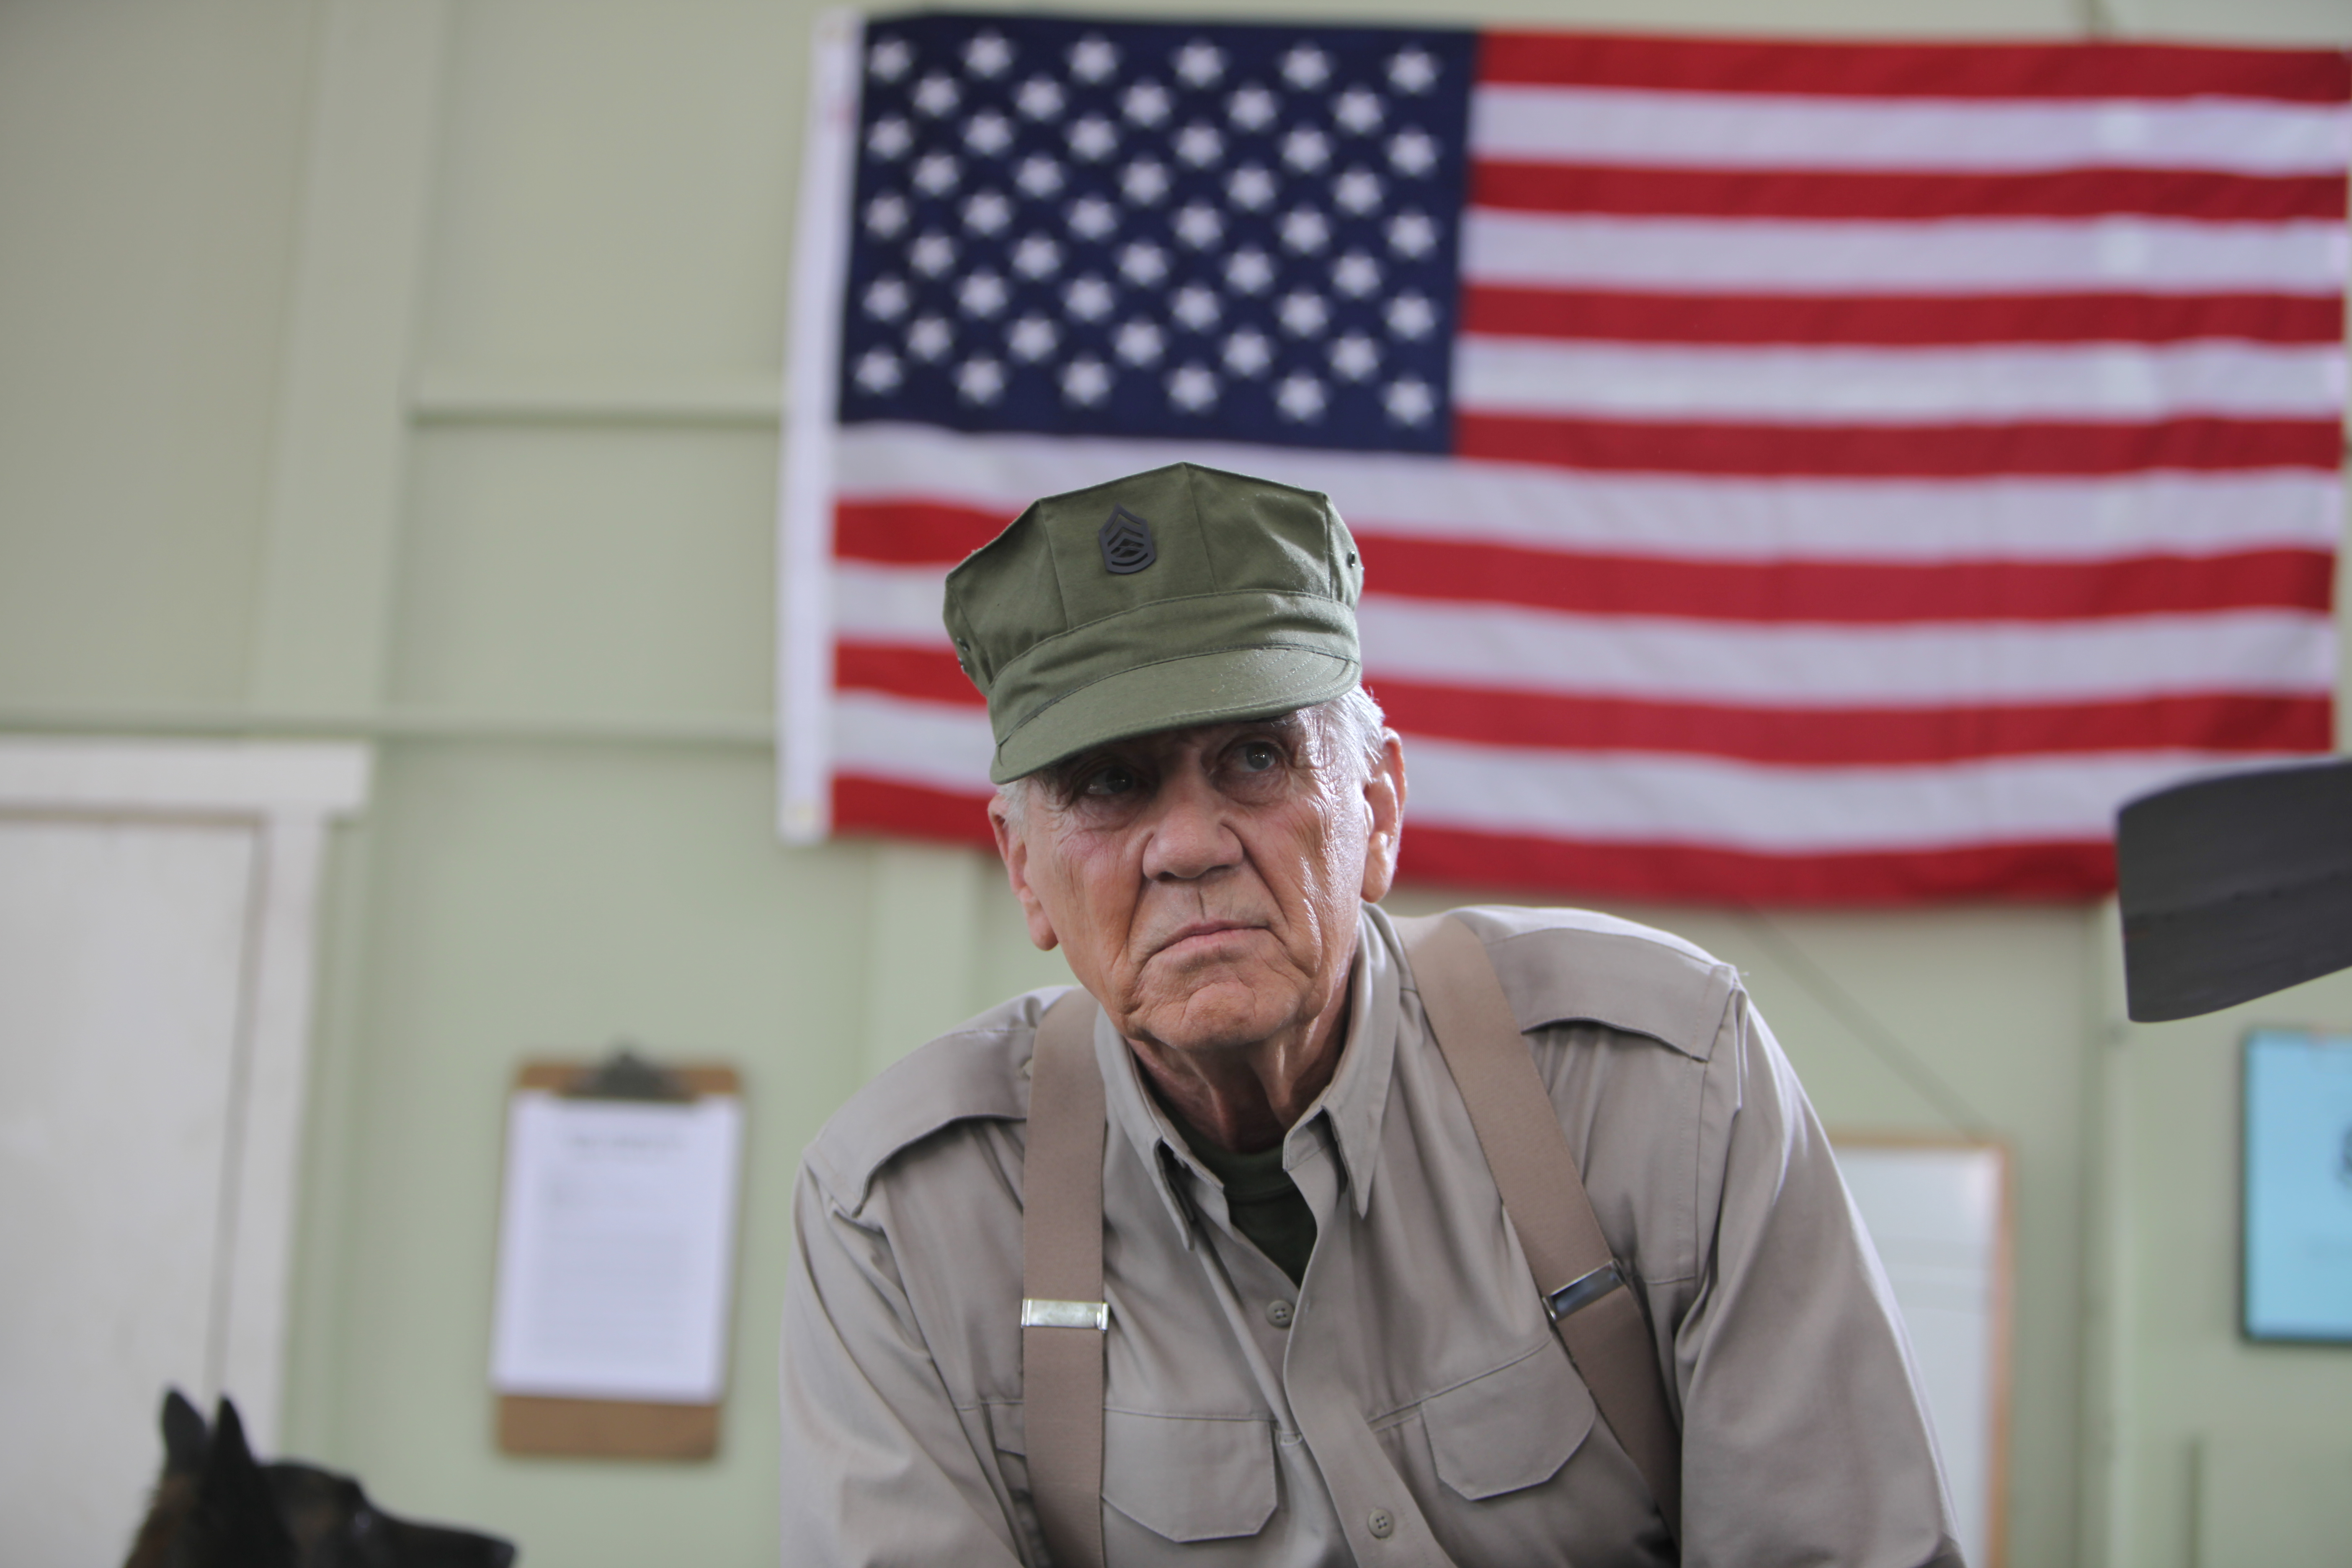 Here are some of the best photographs from 'the Gunny' R. Lee Ermey's  Arlington funeral